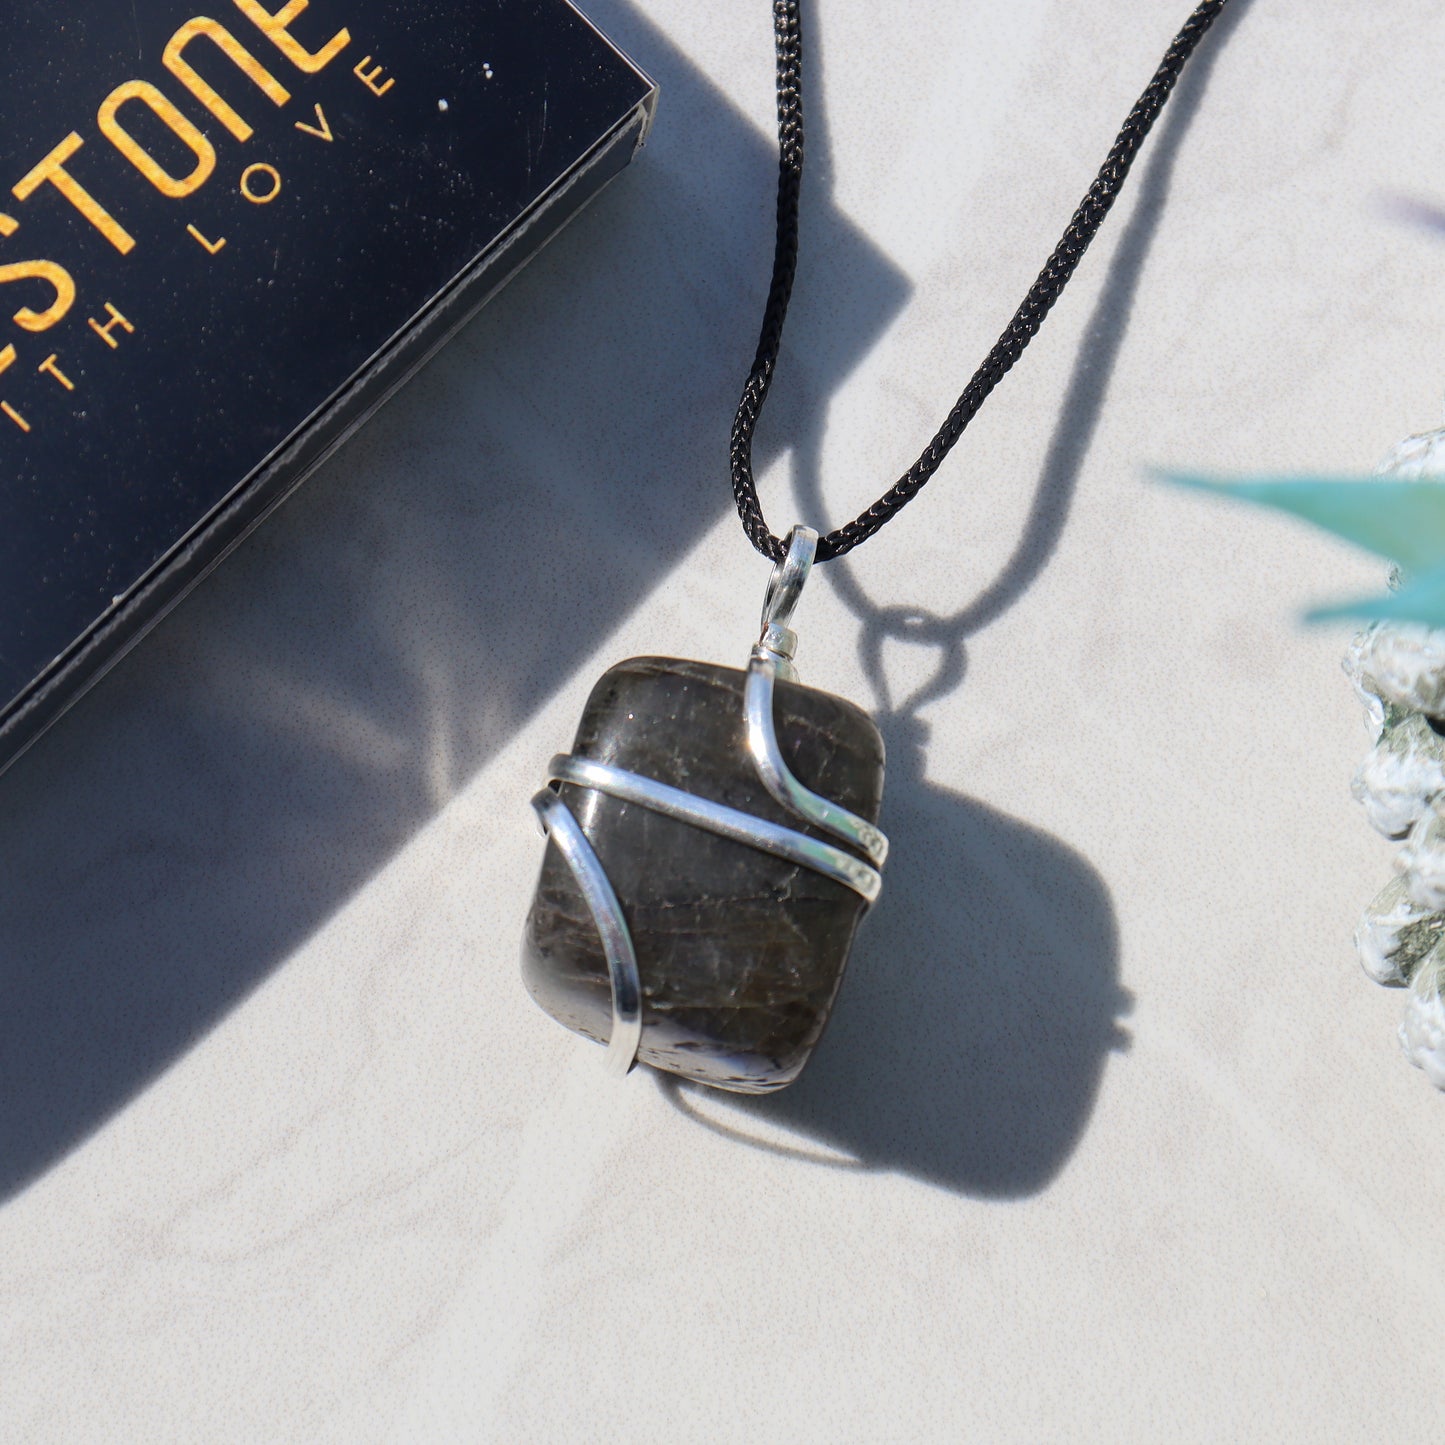 Labradorite Crystal Pendant Necklace for Inner Transformation and self-Discovery - Handmade & Ethically Sourced Raw Stone Necklace for Protection - Best Mother's Day Gift for her